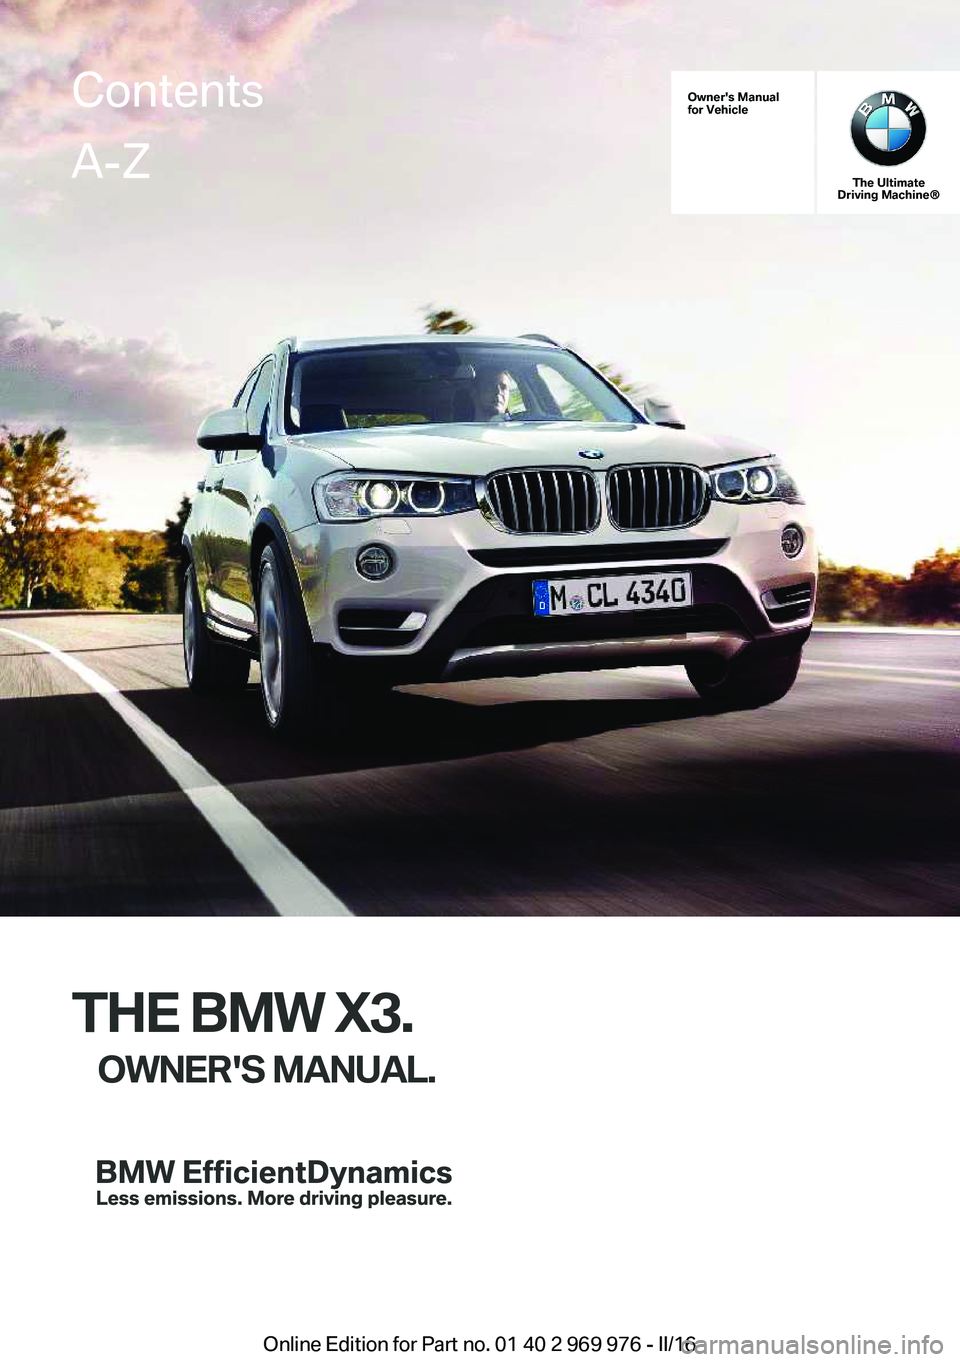 BMW X3 2017  Owners Manual Owner's Manual
for Vehicle
The Ultimate
Driving Machine®
THE BMW X3.
OWNER'S MANUAL.
ContentsA-Z
Online Edition for Part no. 01 40 2 969 976 - II/16   